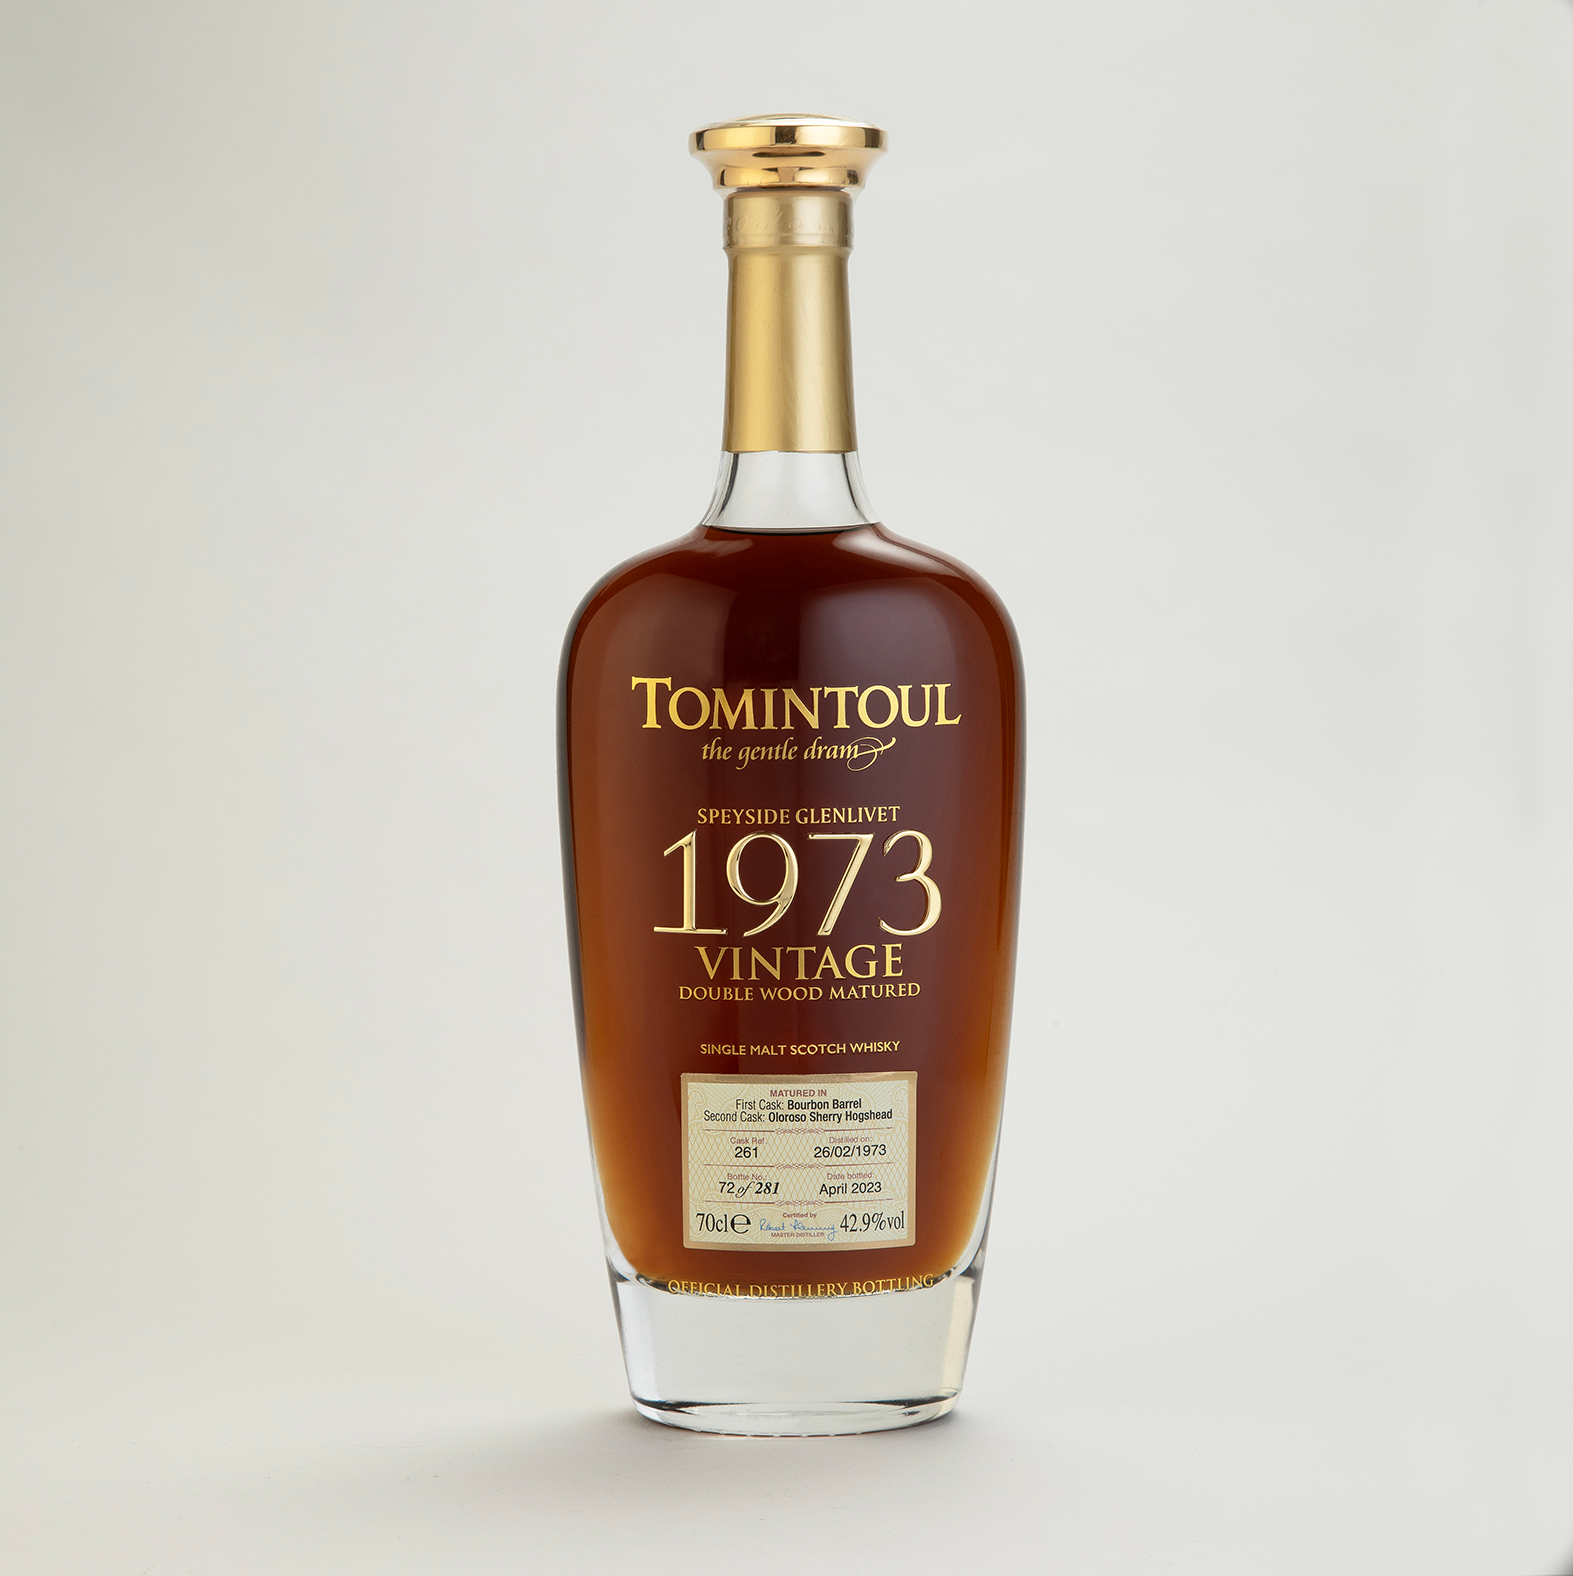 Tomintoul Single Malt Scotch Whisky has announced the limited release of a rare 50-year-old single cask, double wood matured Vintage expression